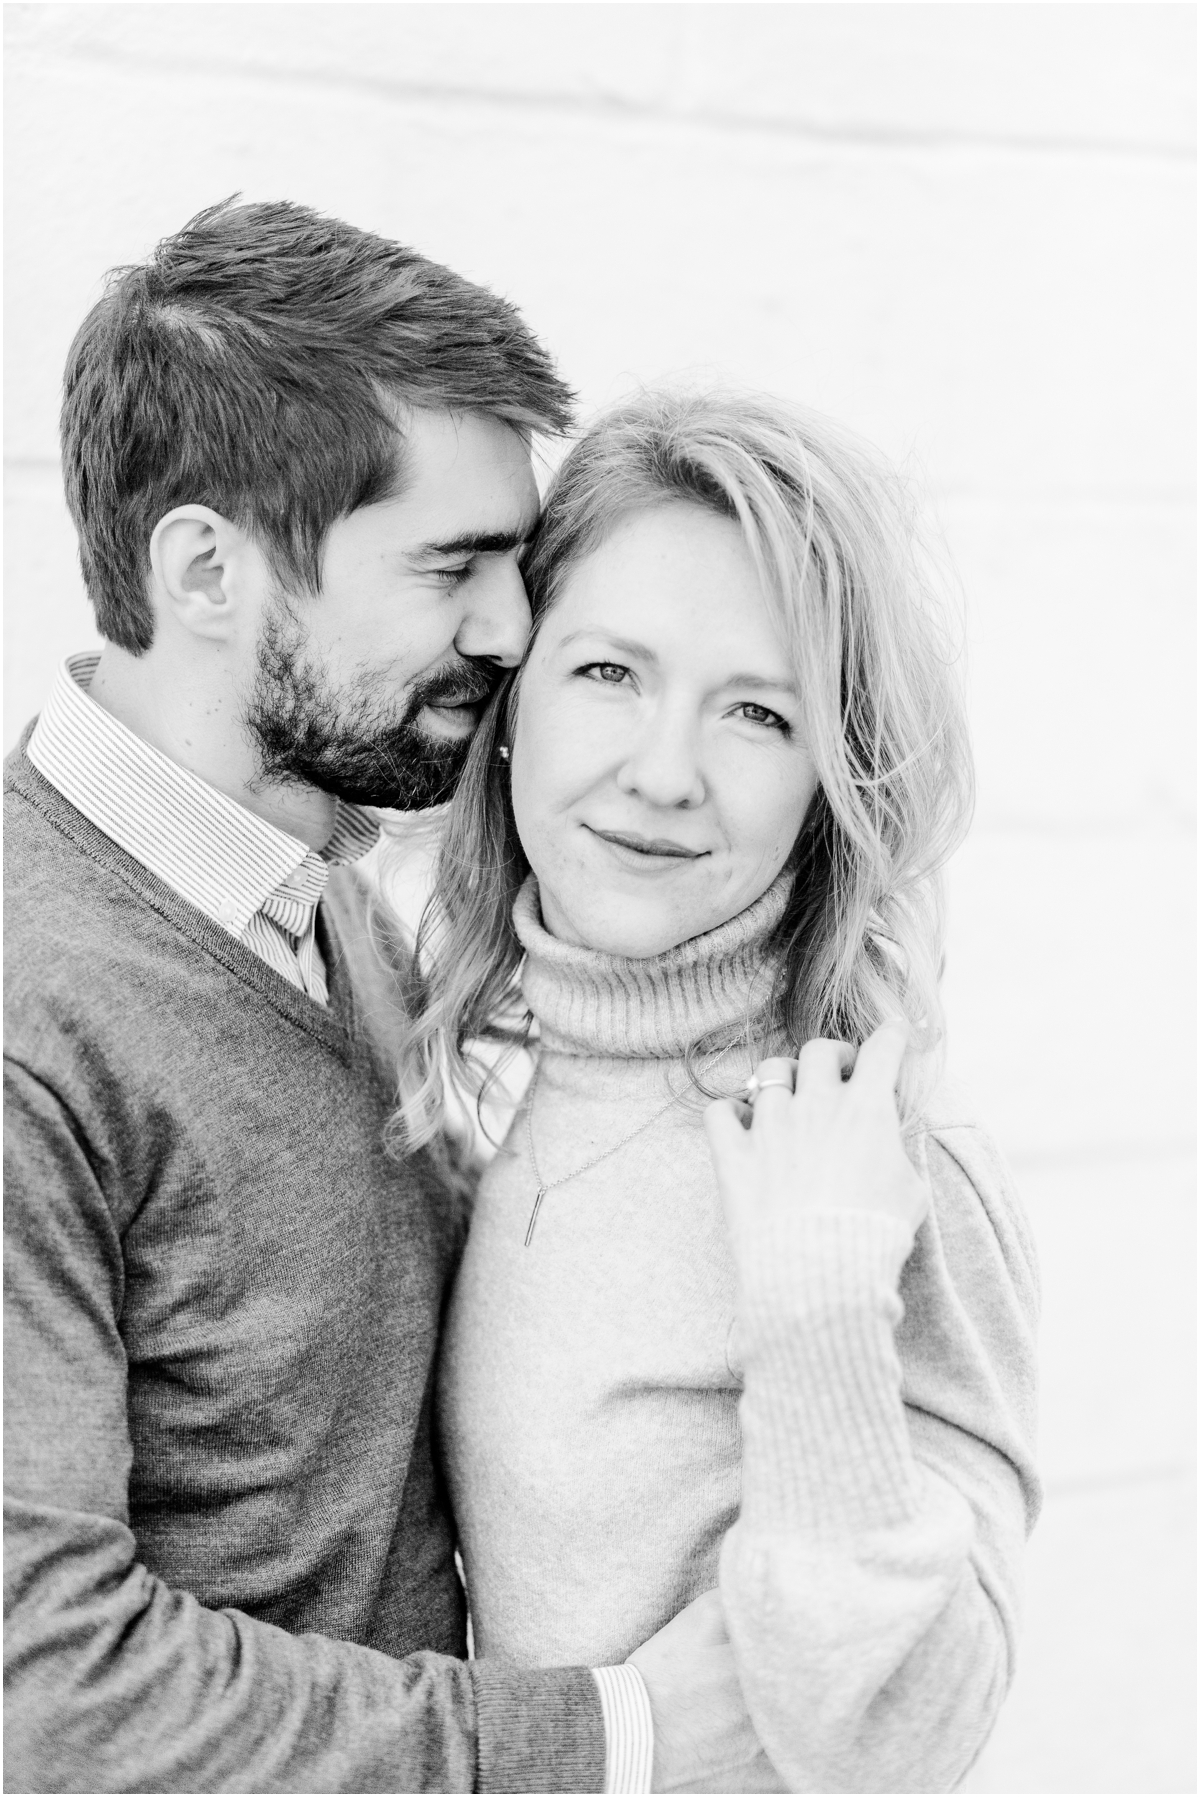 Winter engagement session in downtown Greer, SC at the gazebo